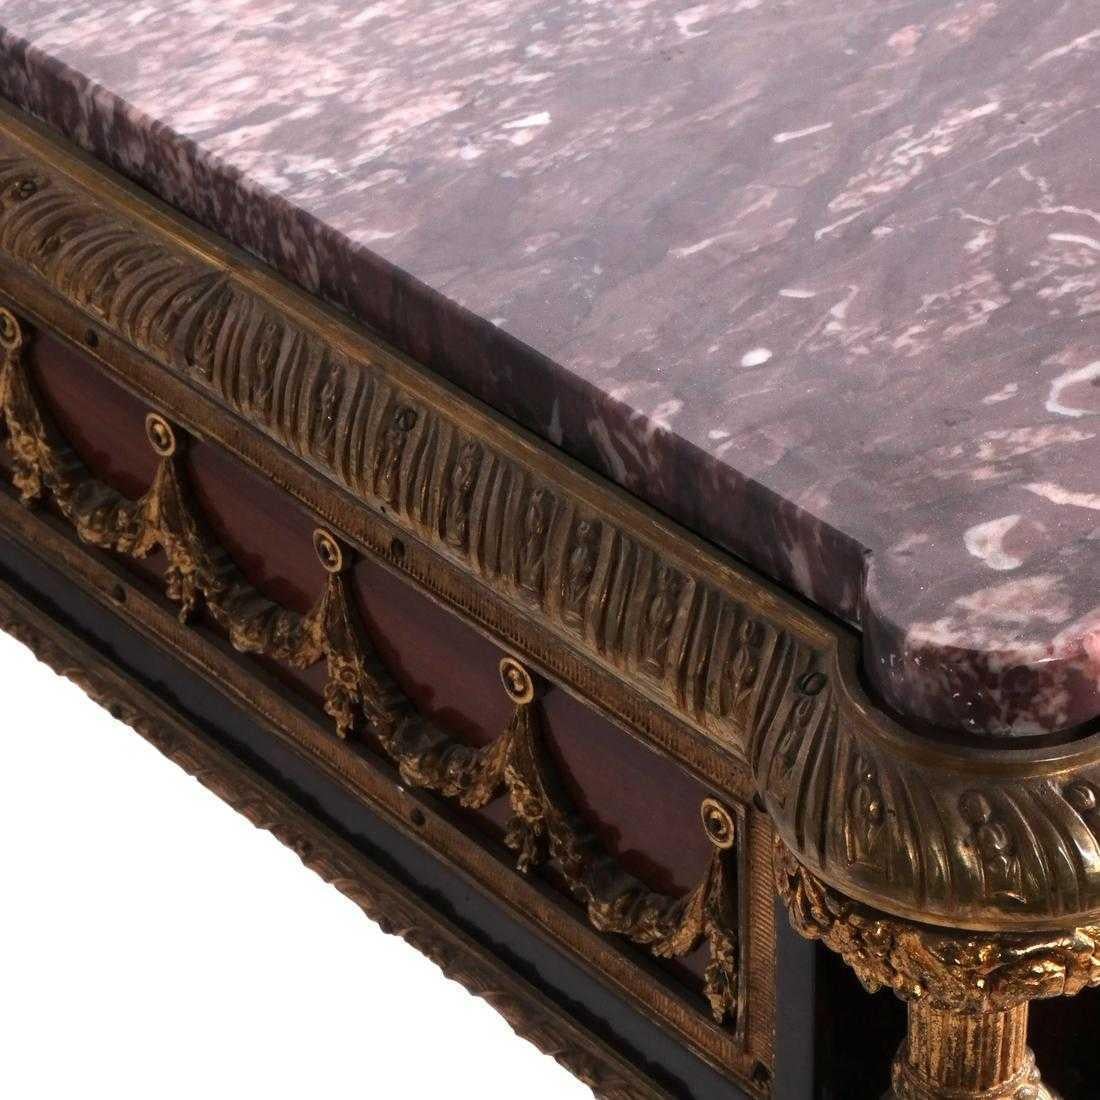 20th Century Louis XVI Style Bronze Center Table Desk in Adam Weisweiler Manner with Marble